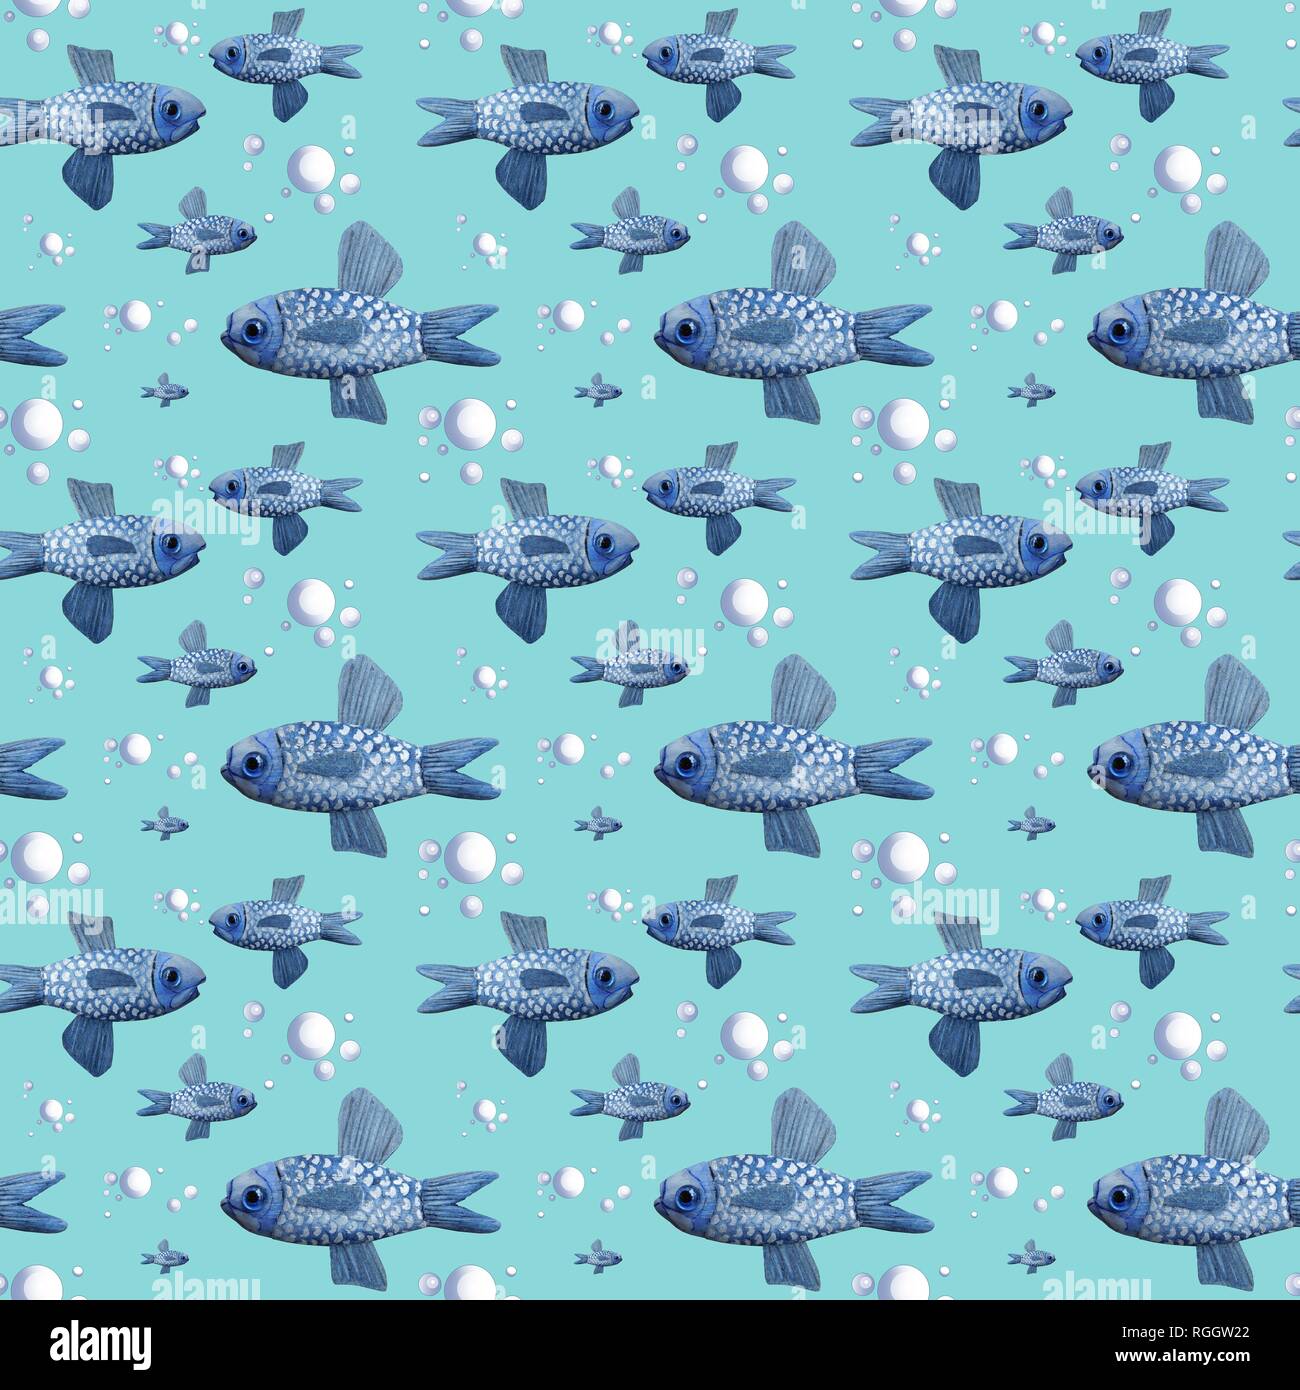 Wallpaper, wrapping paper, seamless pattern, fish with bubbles, background turquoise, Germany Stock Photo